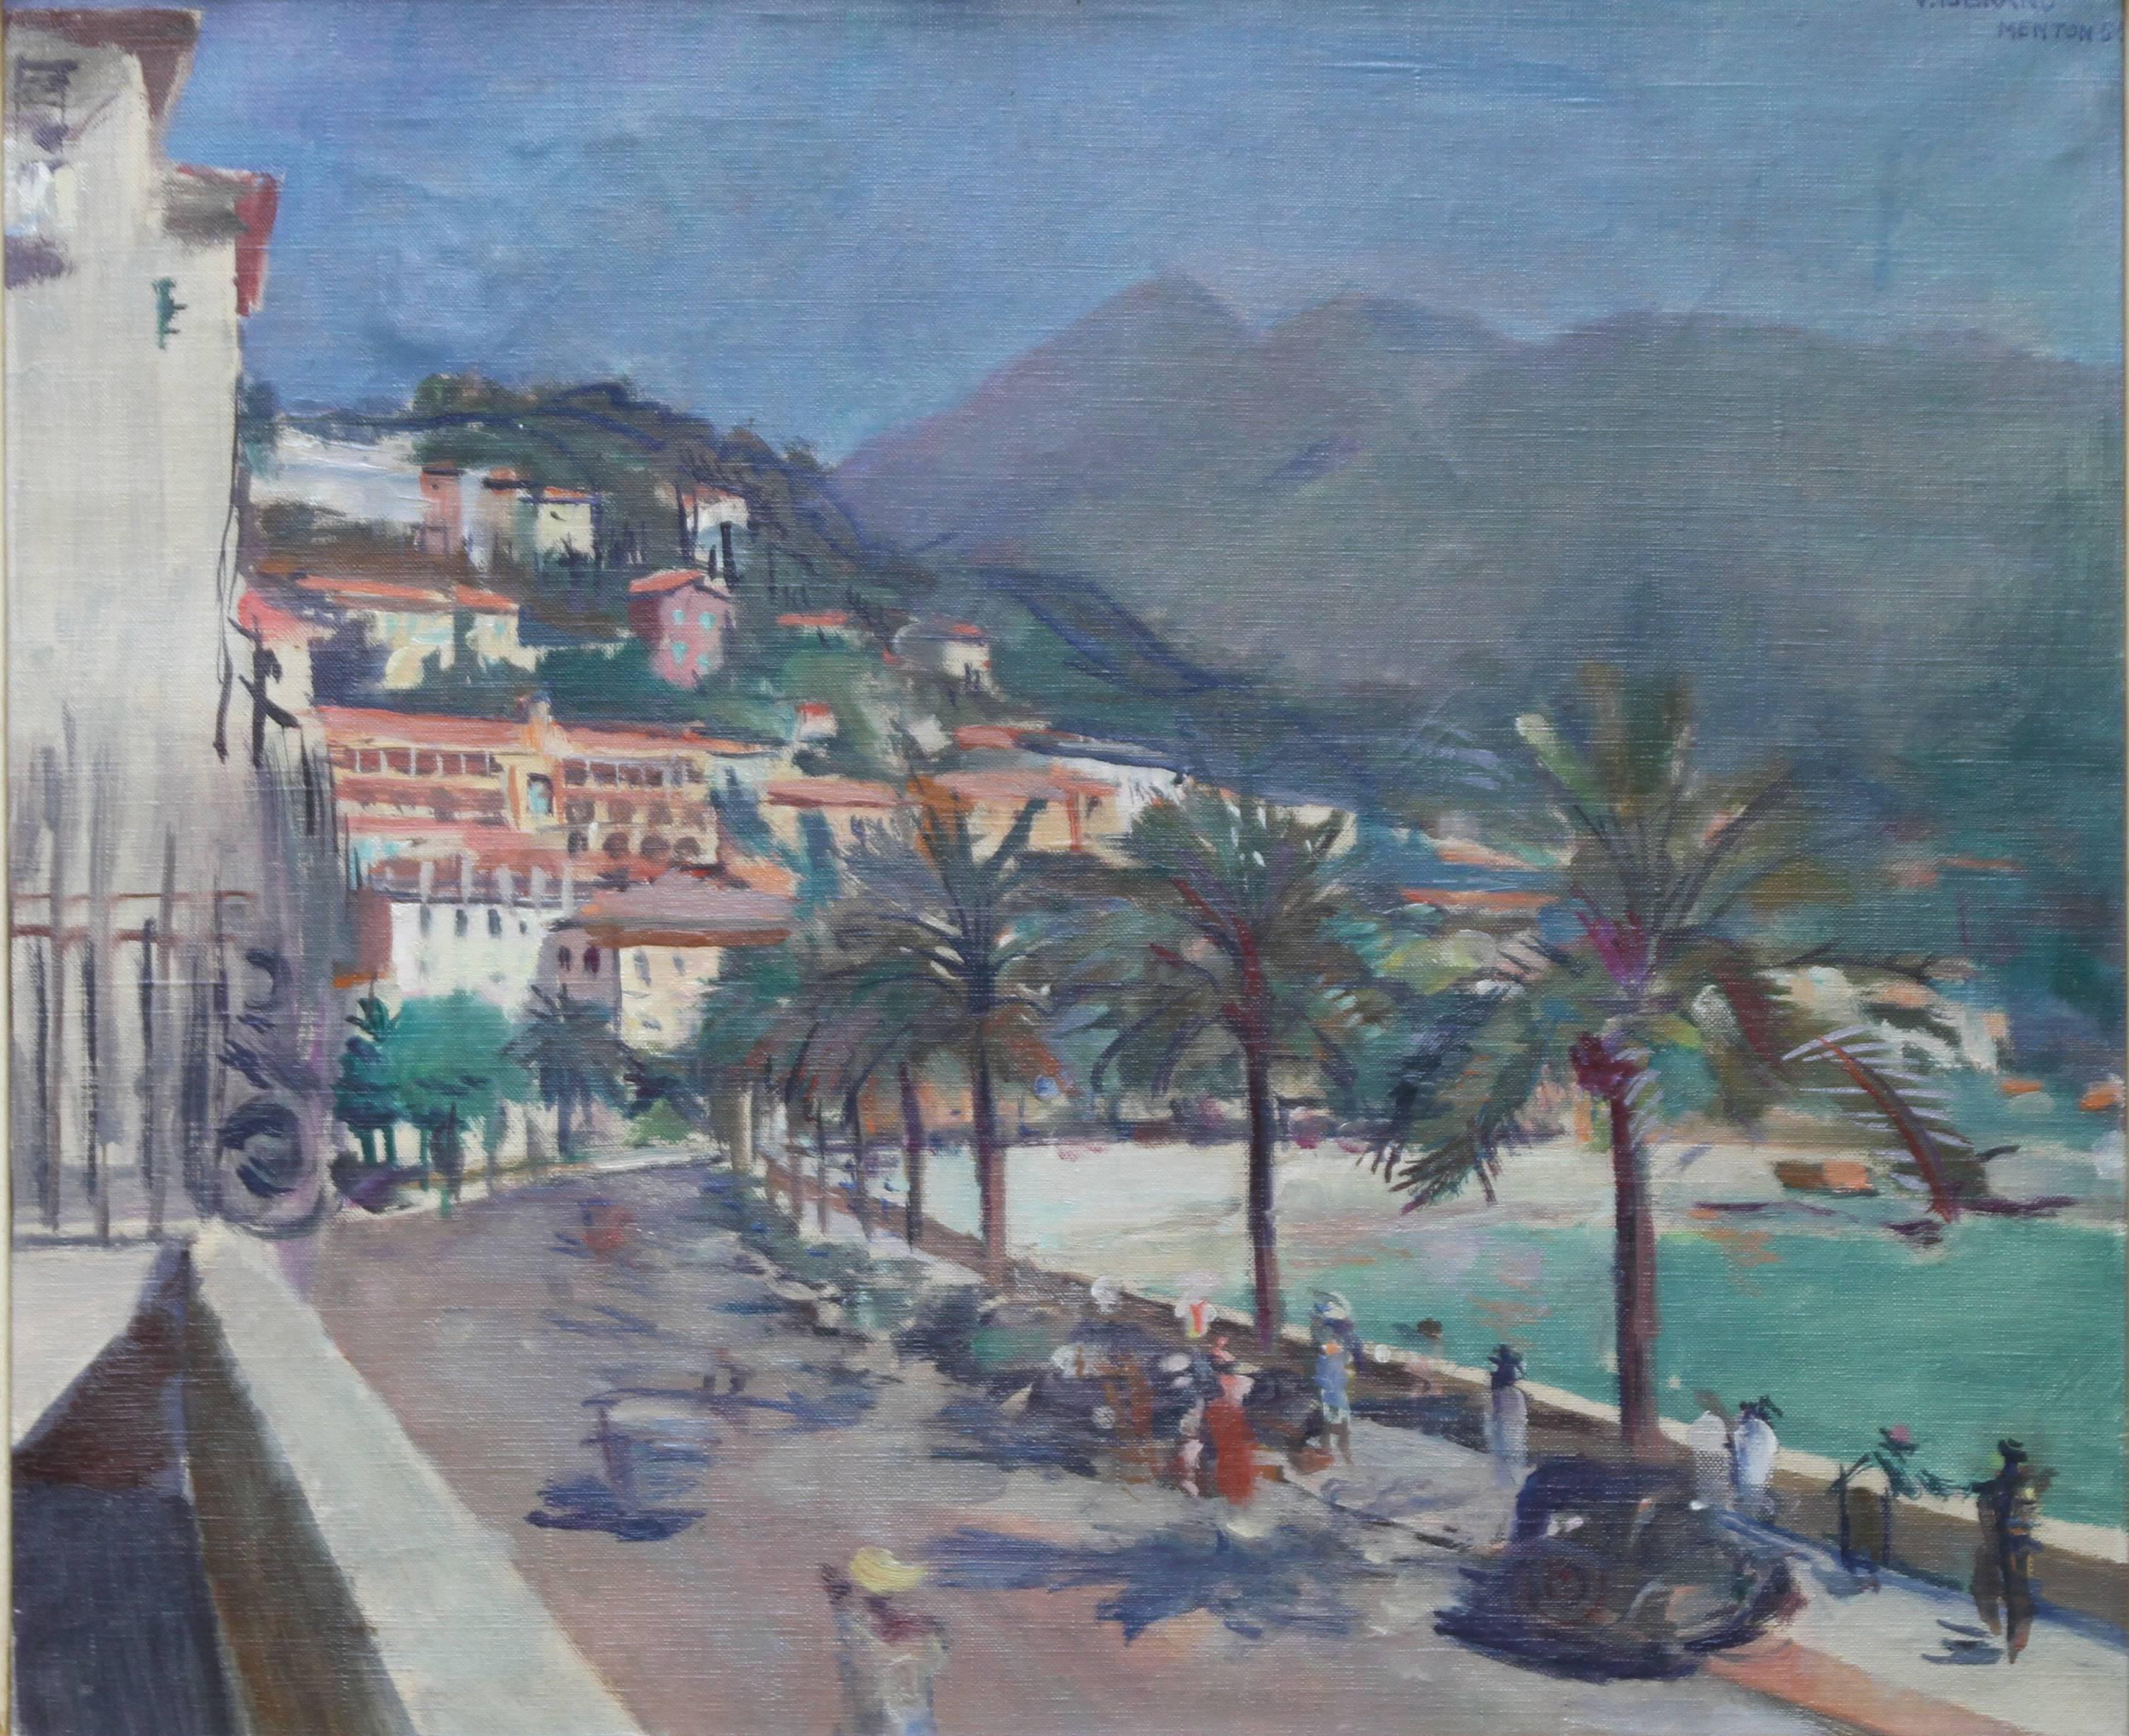 Menton South of France - British 40's Impressionist oil painting beach promenade - Painting by Victor Isbrand